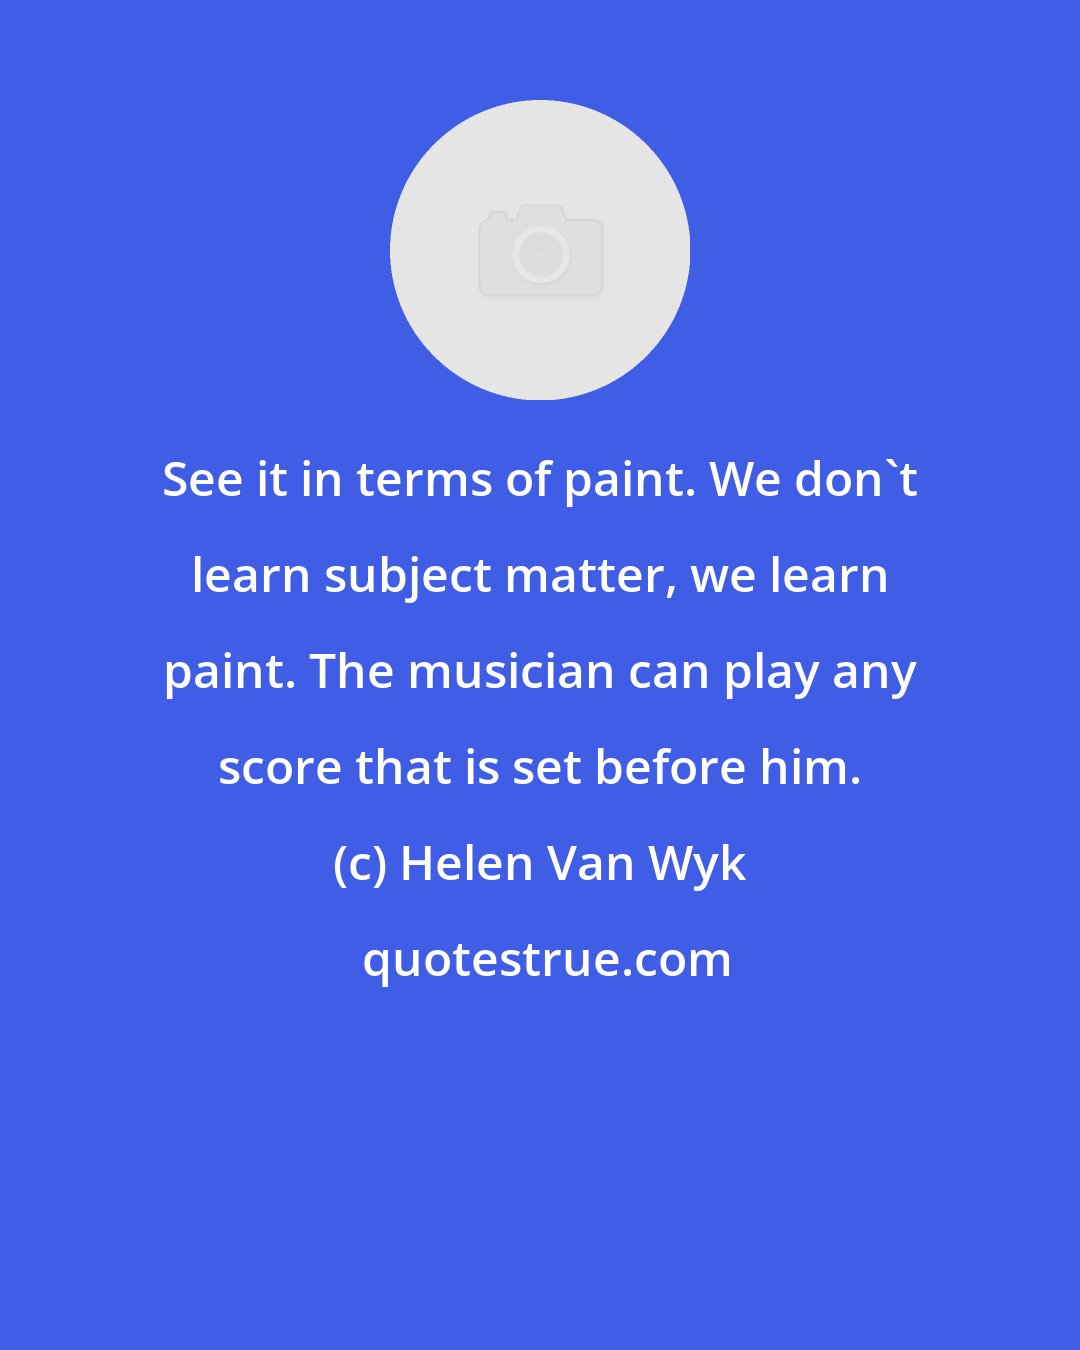 Helen Van Wyk: See it in terms of paint. We don't learn subject matter, we learn paint. The musician can play any score that is set before him.